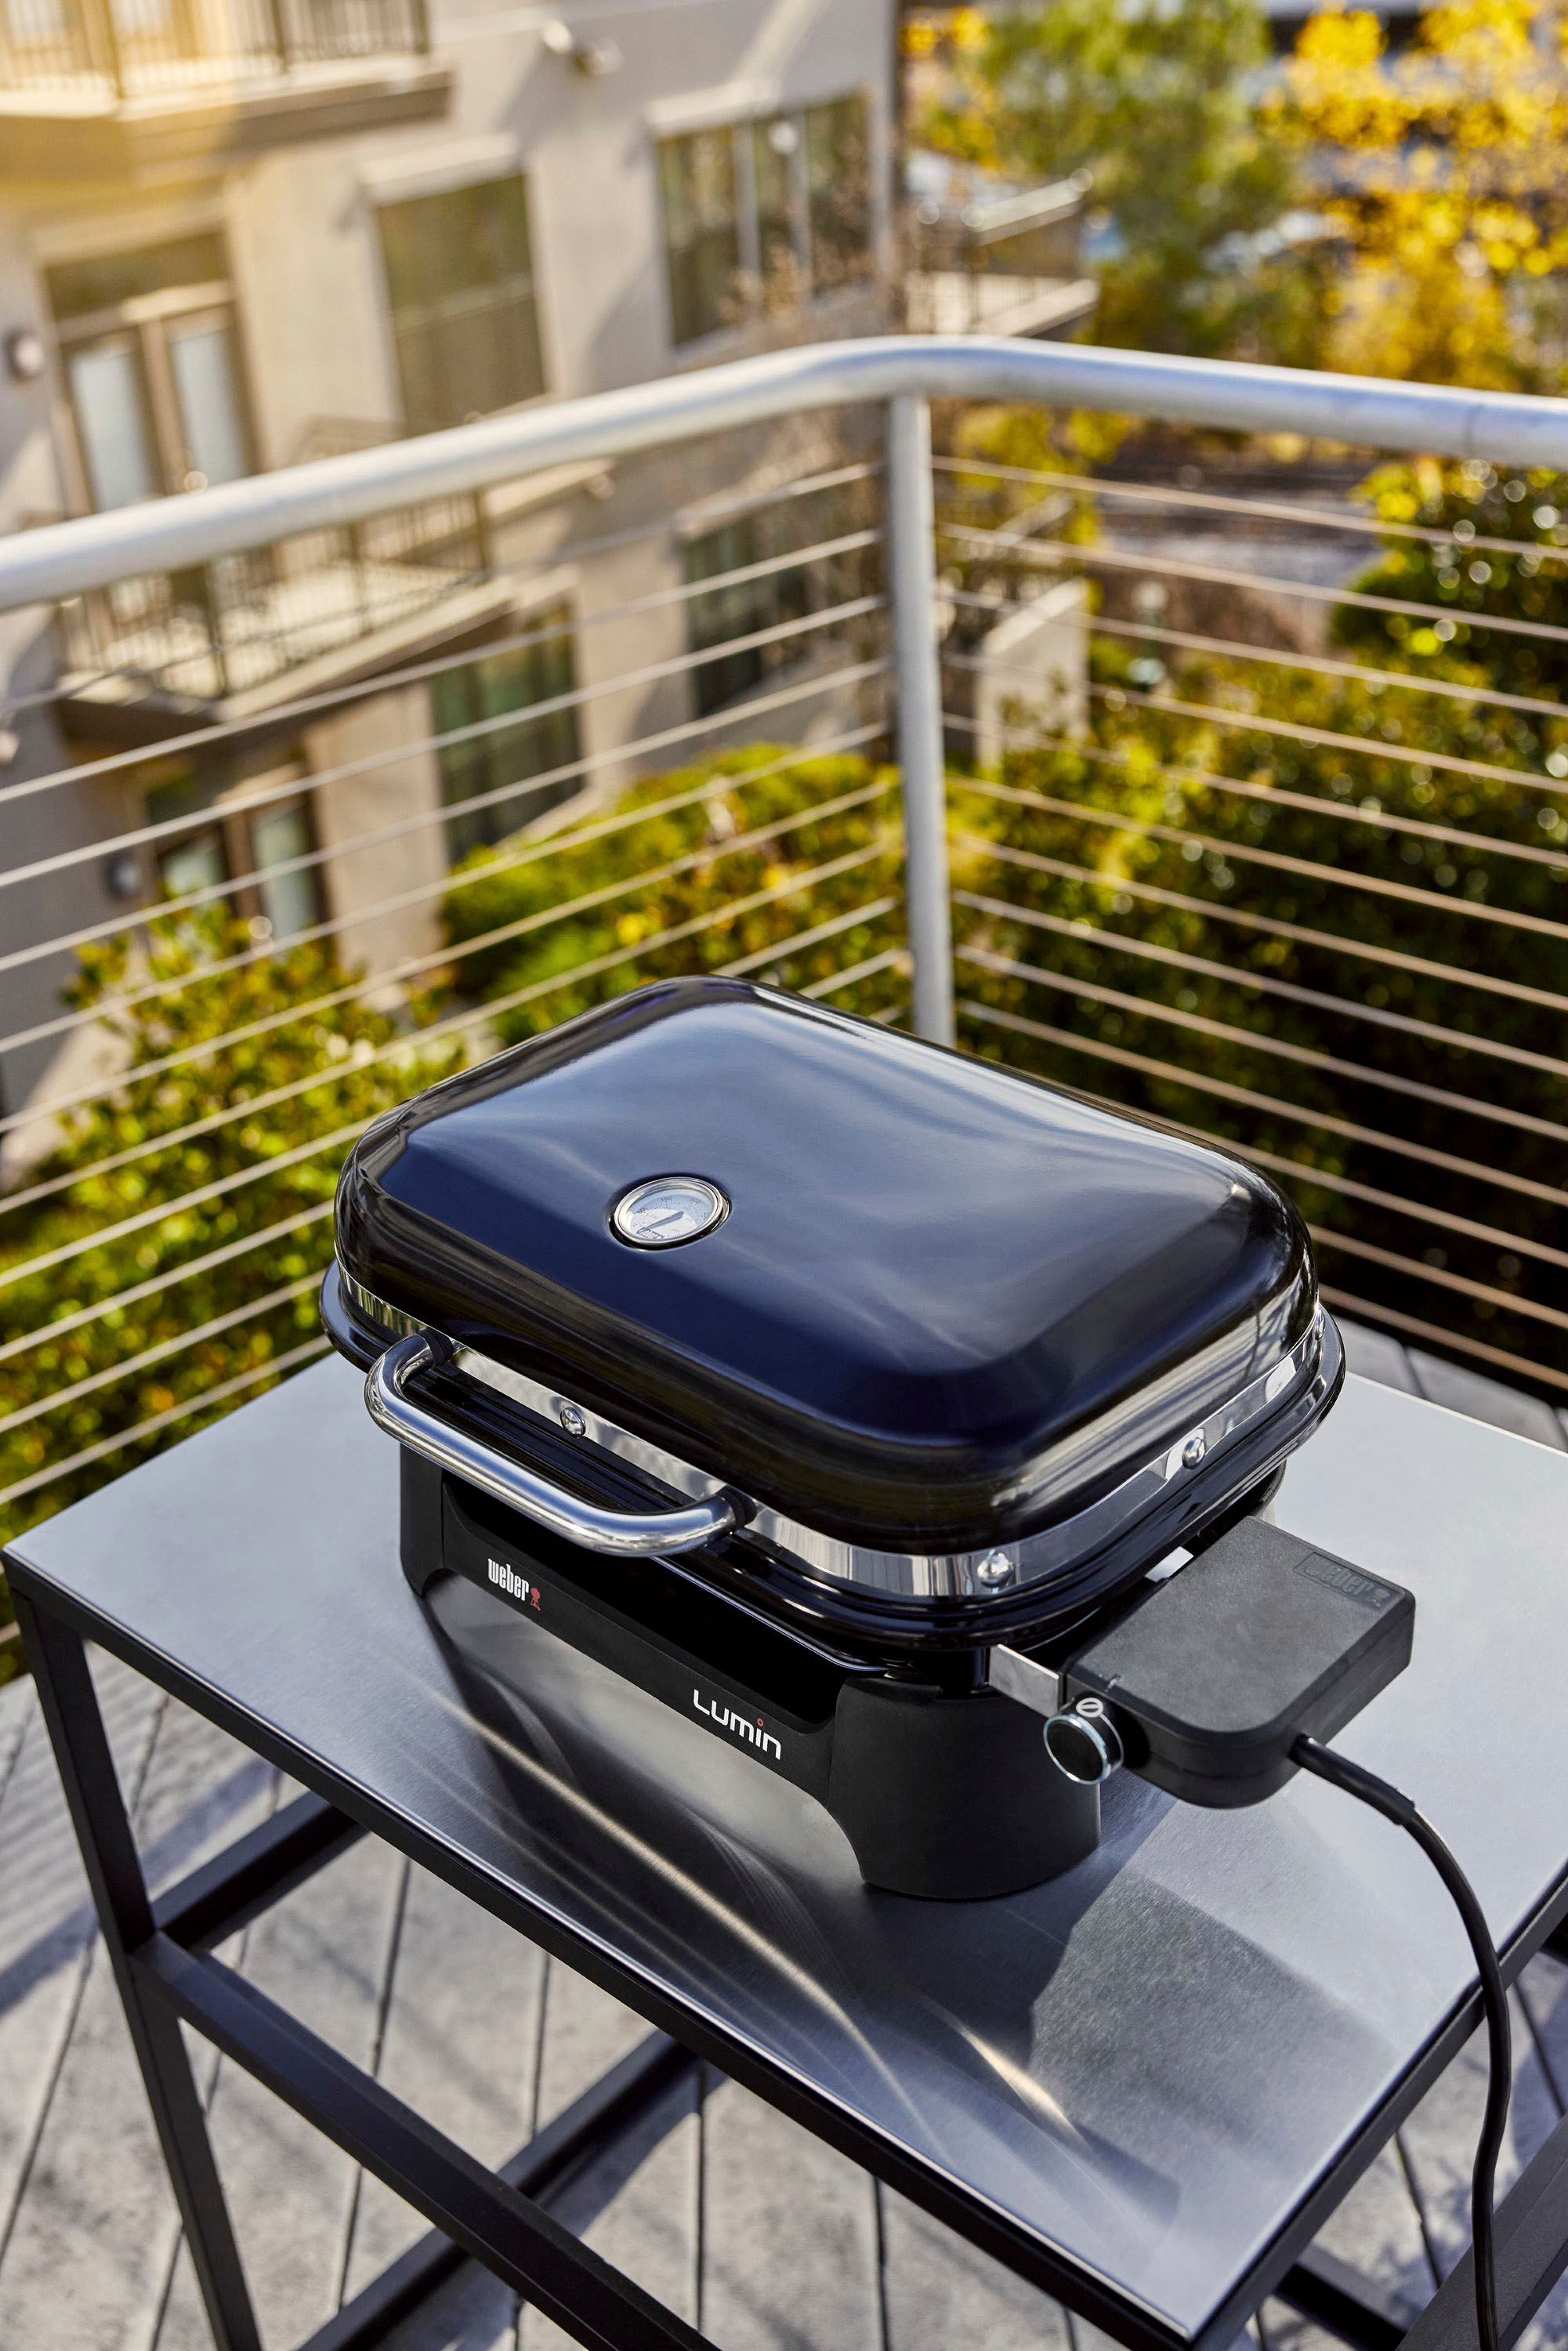 Weber Lumin Outdoor Electric Barbecue Grill, Black - Great Small Spaces  such as Patios, Balconies, and Decks, Portable and Convenient – Interrobang  Automotive